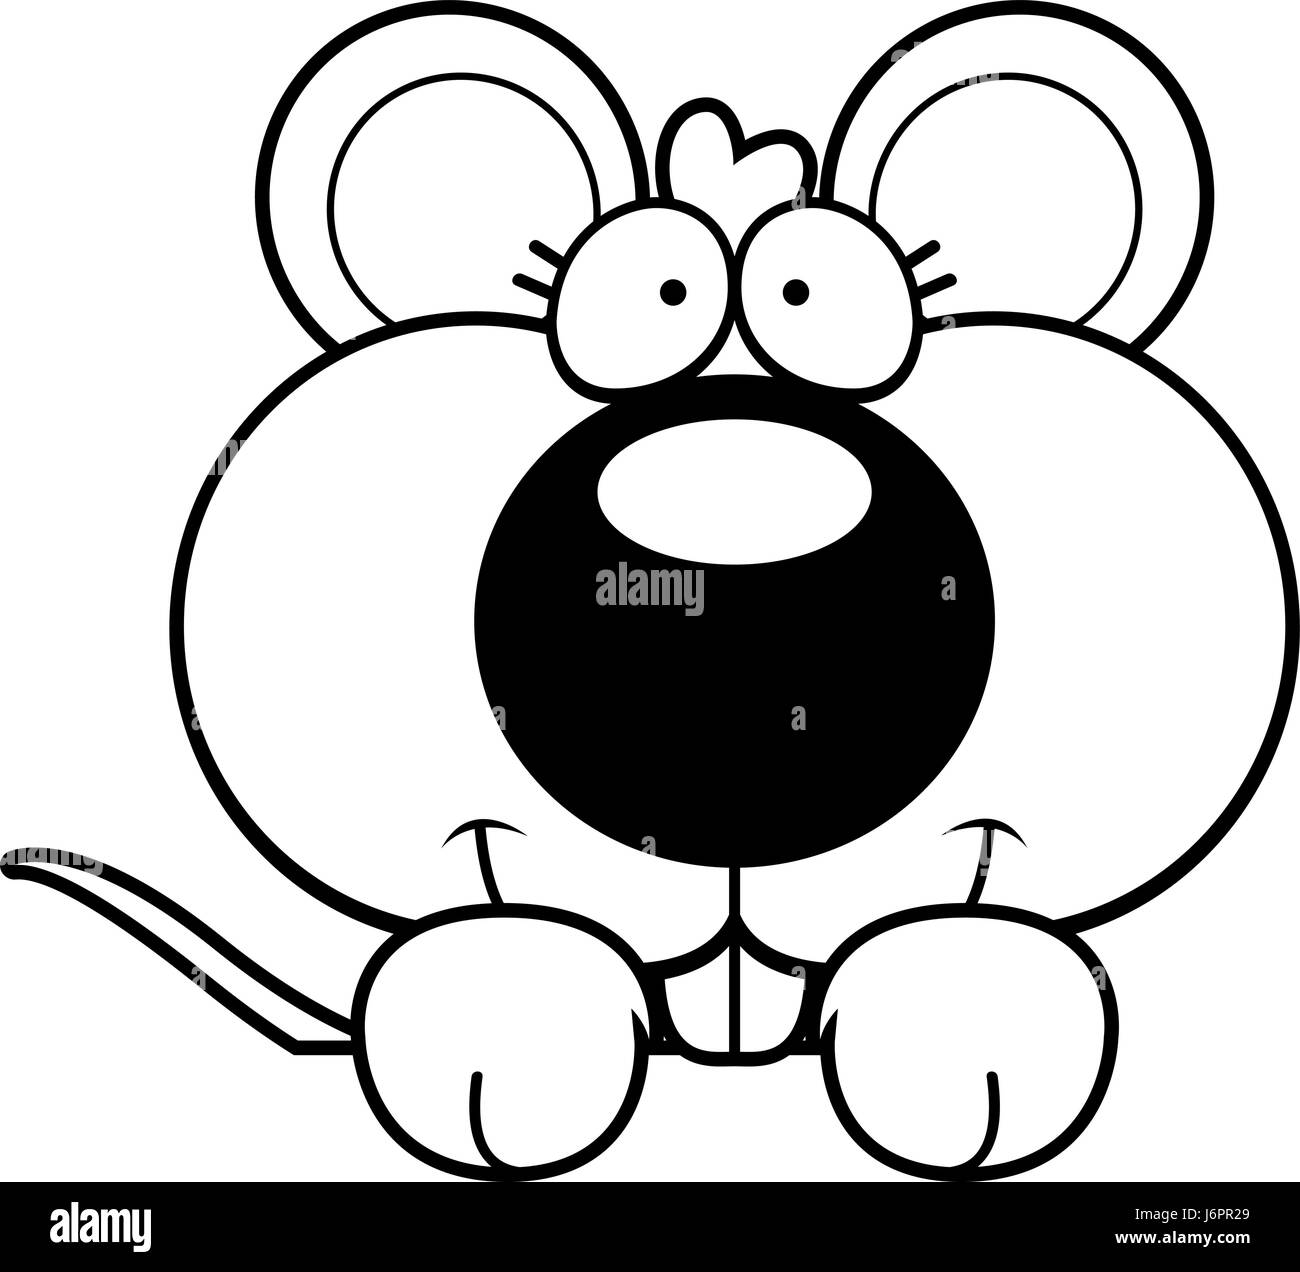 A cartoon illustration of a baby mouse peeking over an object. Stock Vector